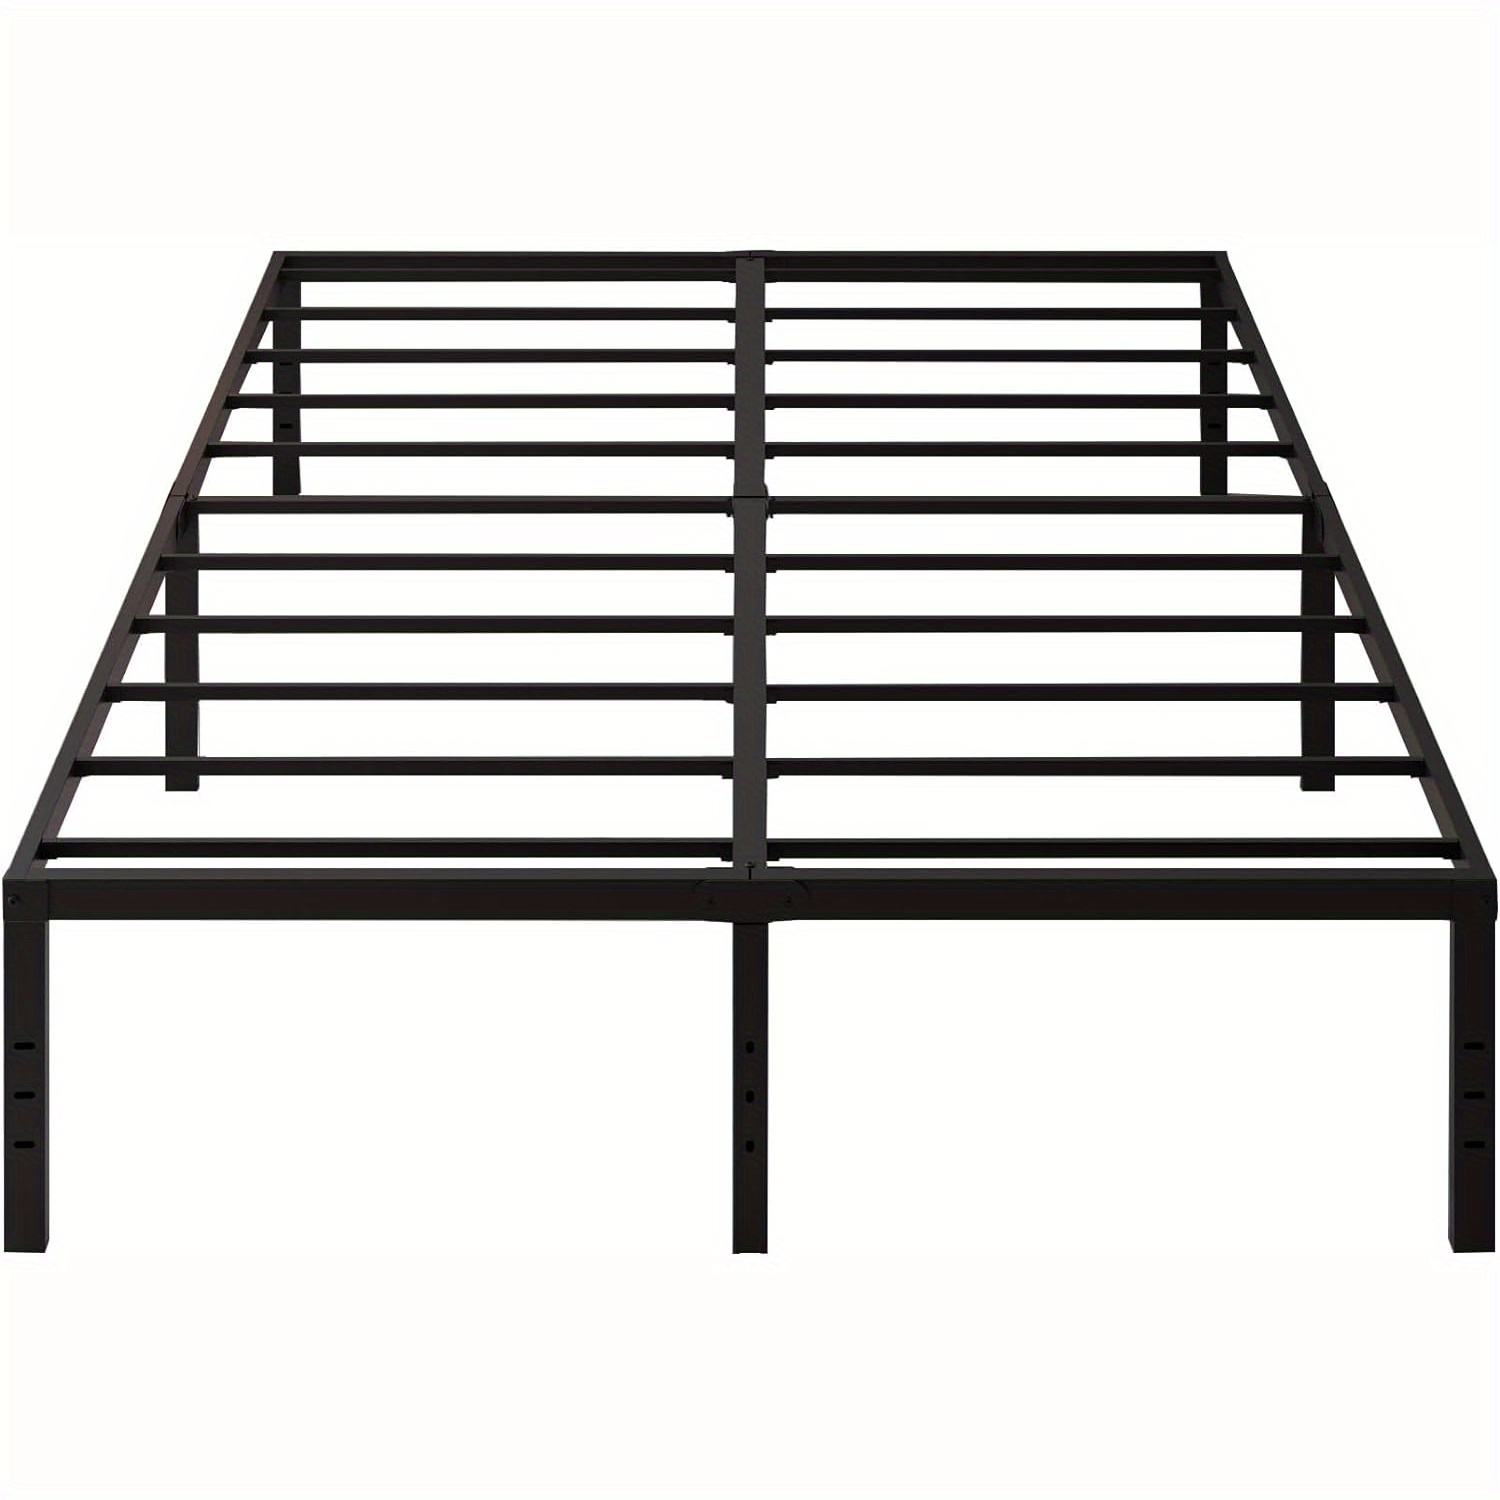 

Twin Bed Frames Metal Platform Twin Xl Full Queen California King Bed Frame 14/18 Inch Max 2000lbs Heavy Duty Metal Slat Support, No Box Spring Needed Underbed Storage, Easy To Assembly, Black